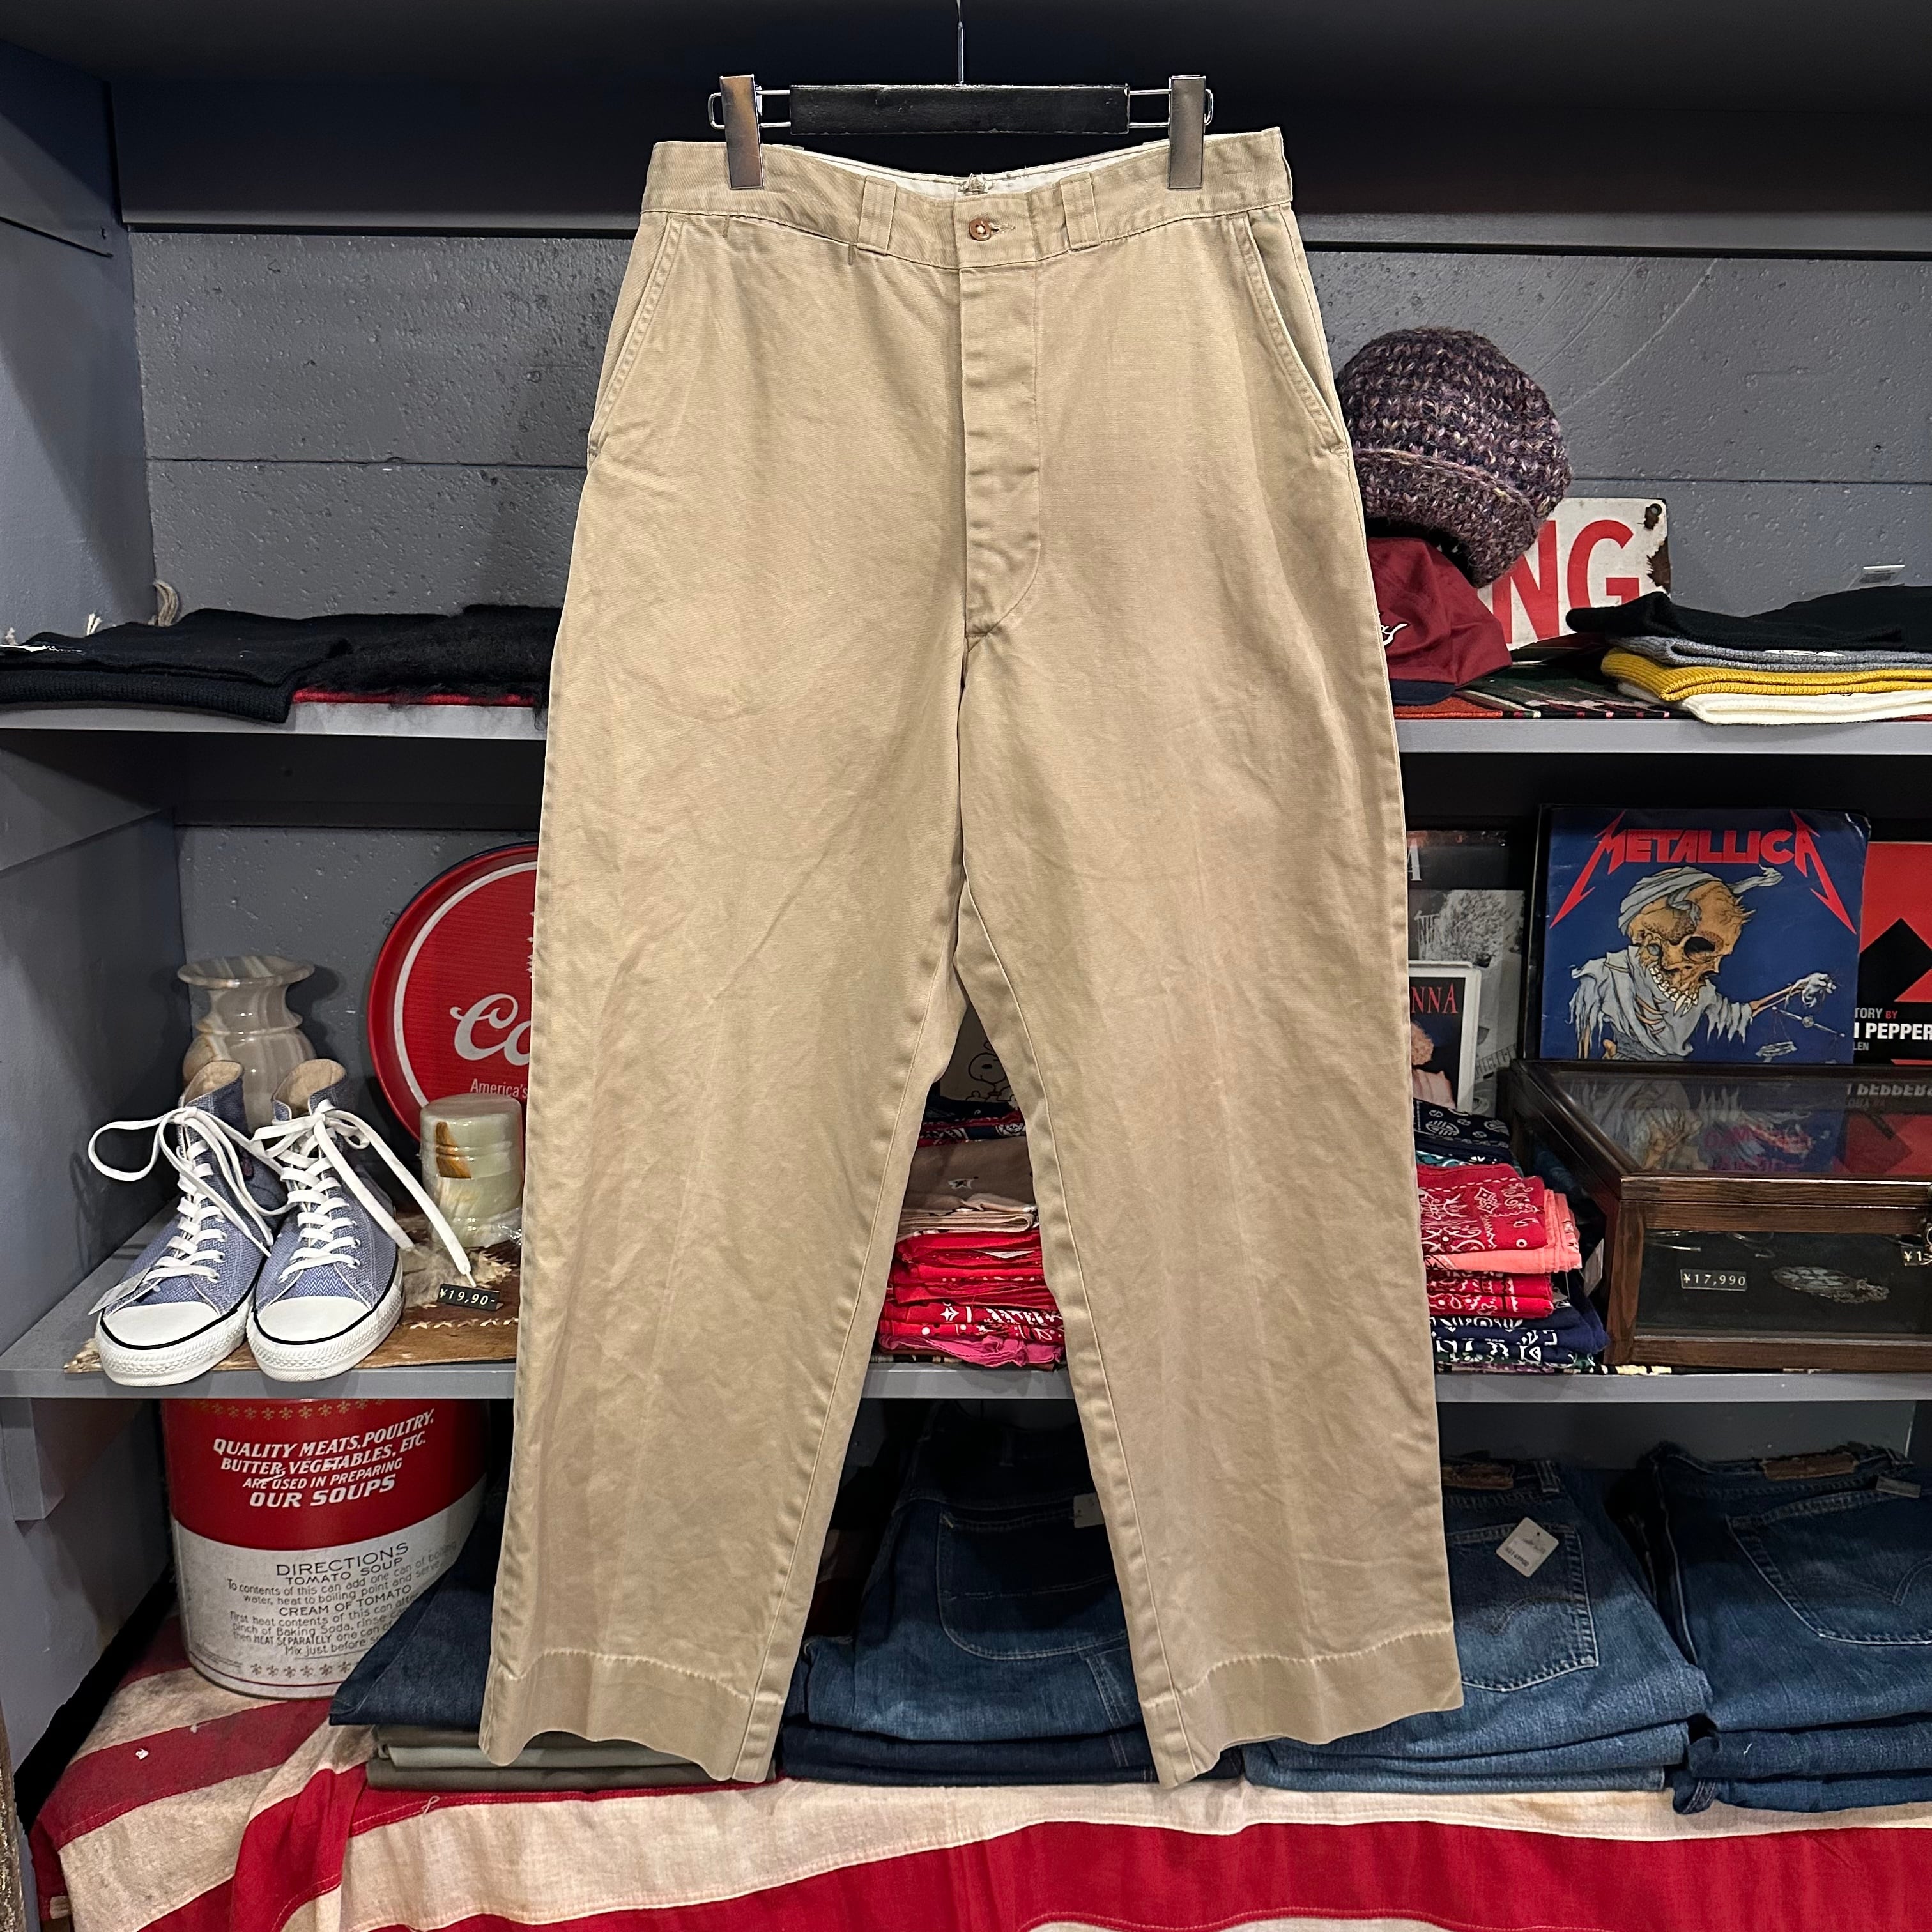 1950’s us army  / chino trousers